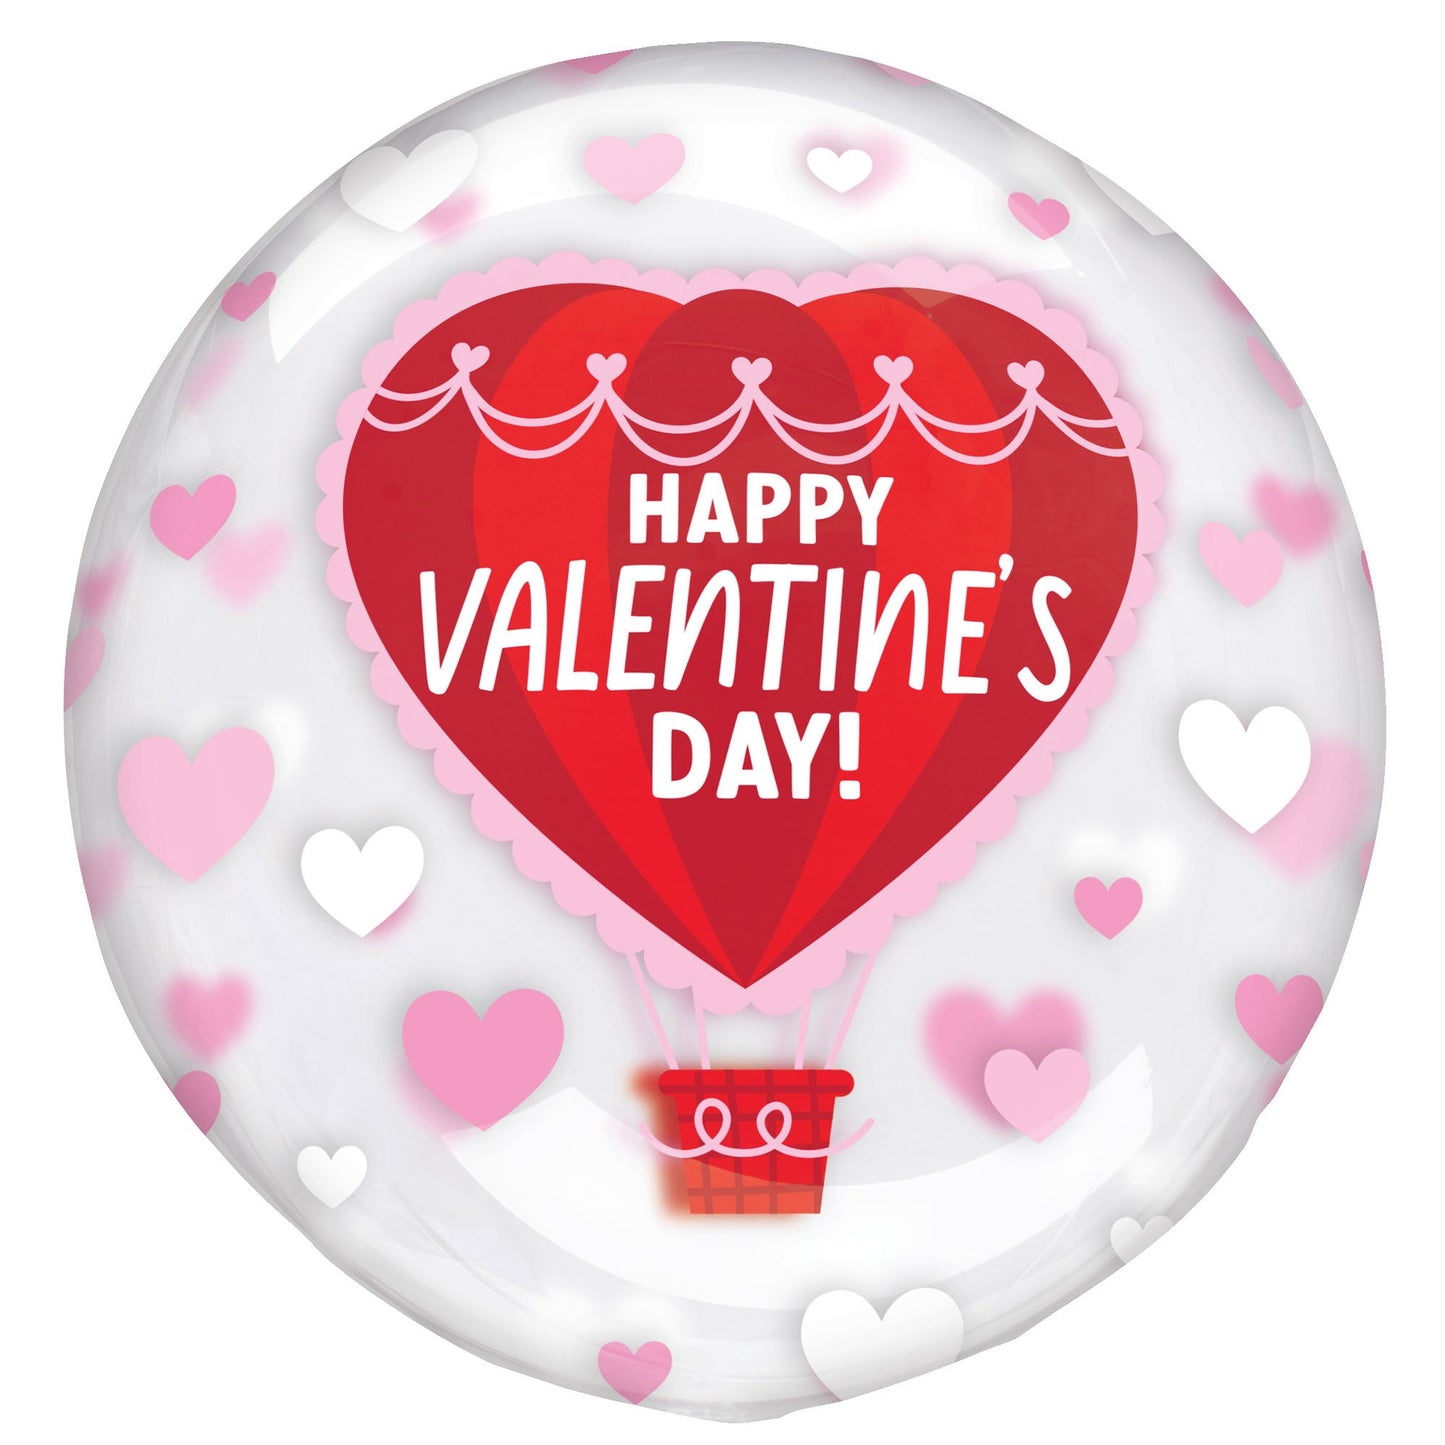 Printed Clearz Happy Valentine's Day Hot Air Balloon G20